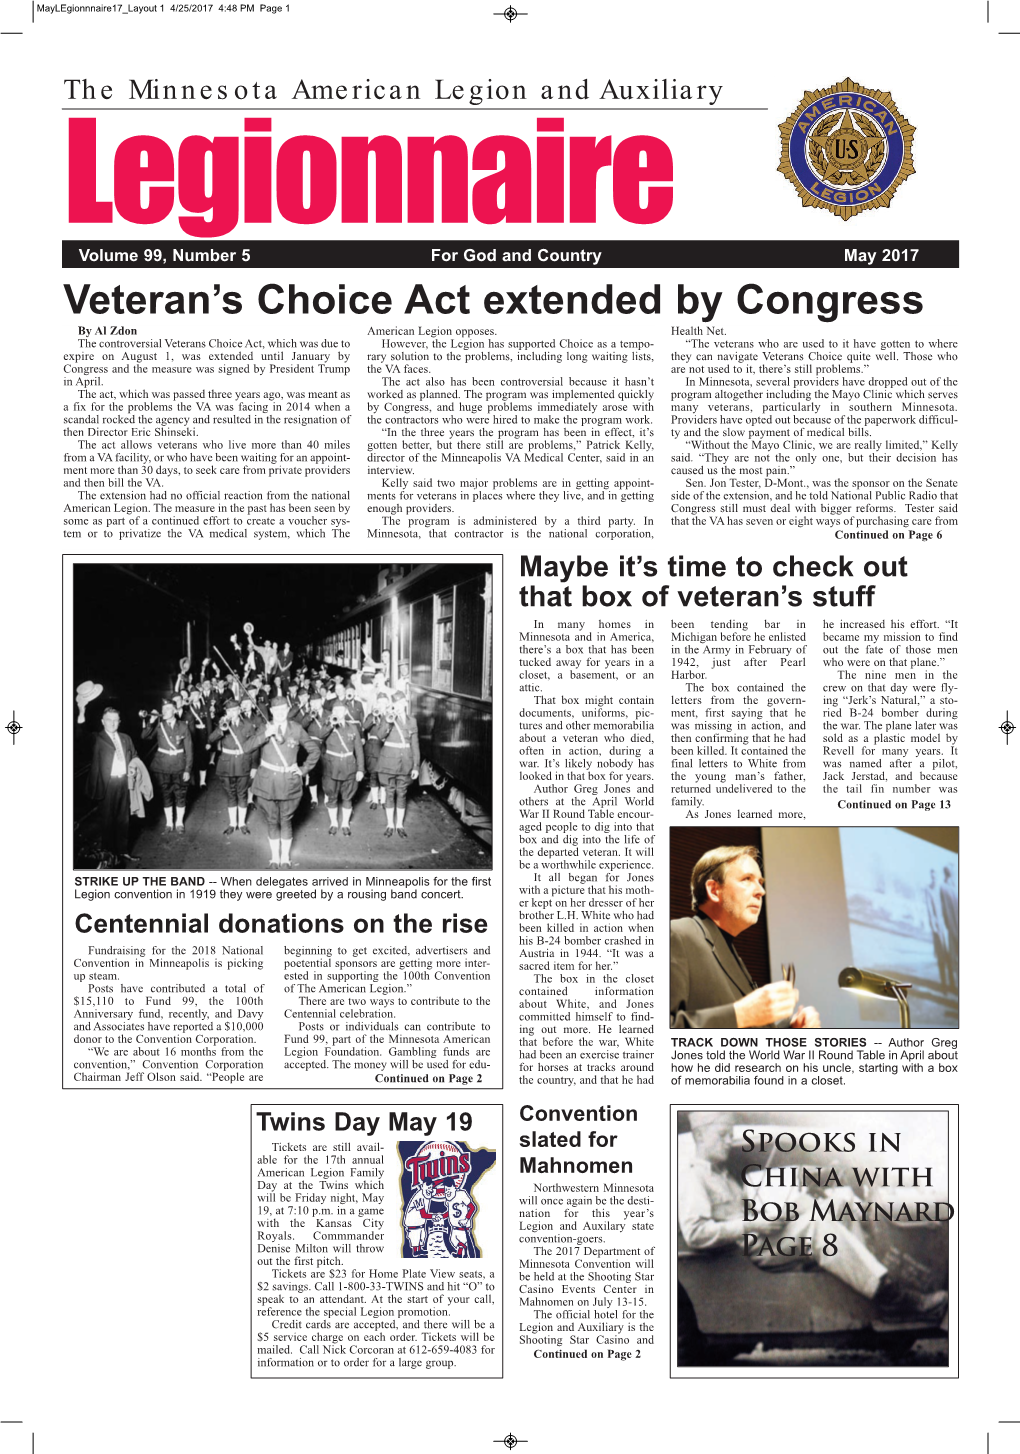 Veteran's Choice Act Extended by Congress